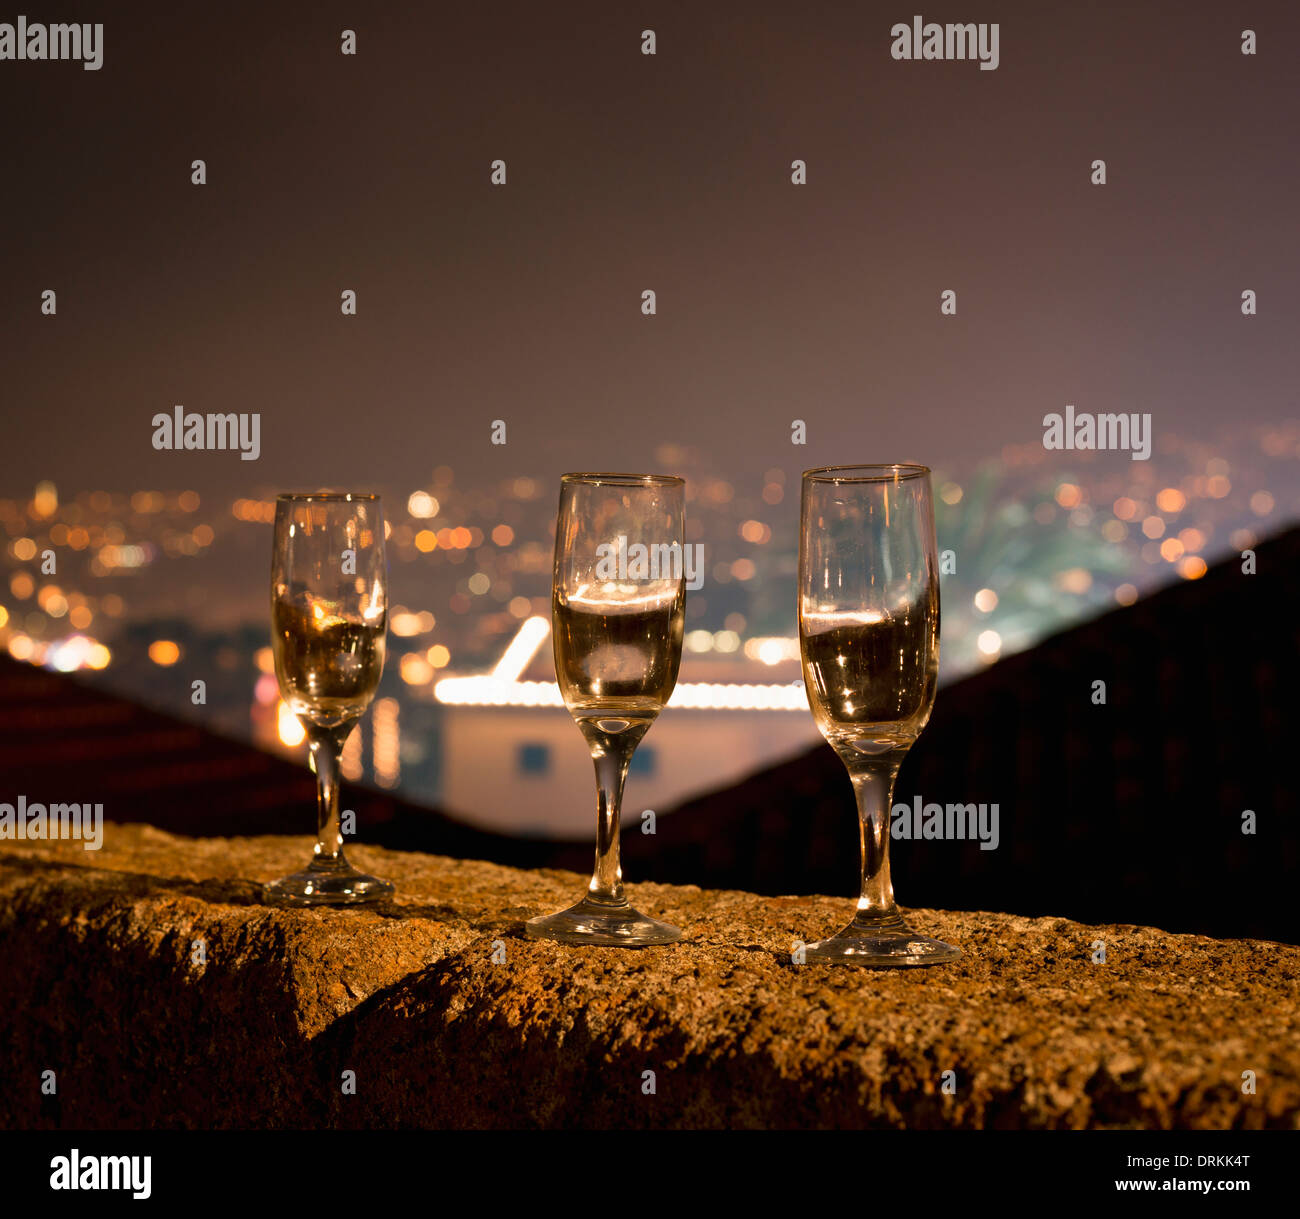 Portugal, Madeira, Funchal, Forte de Sao Tiago, three empty champagne glasses standing on balustrade at New Year's Eve Stock Photo